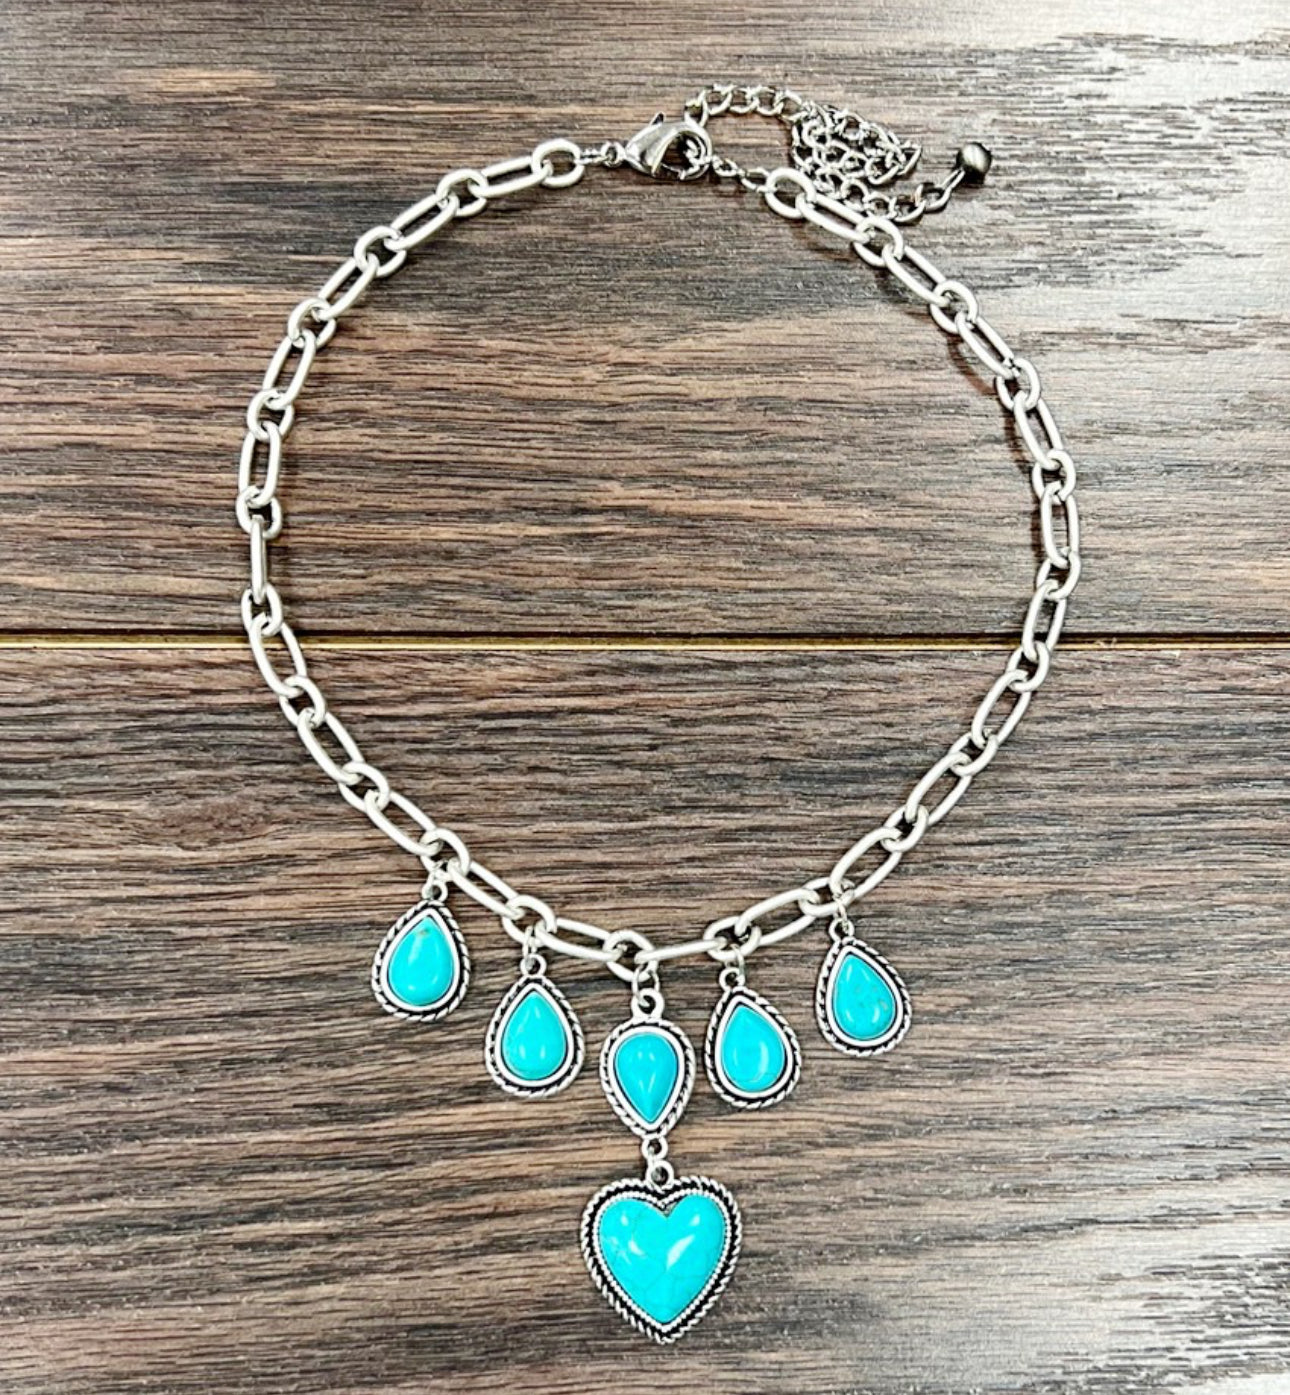 Heart turquoise necklace